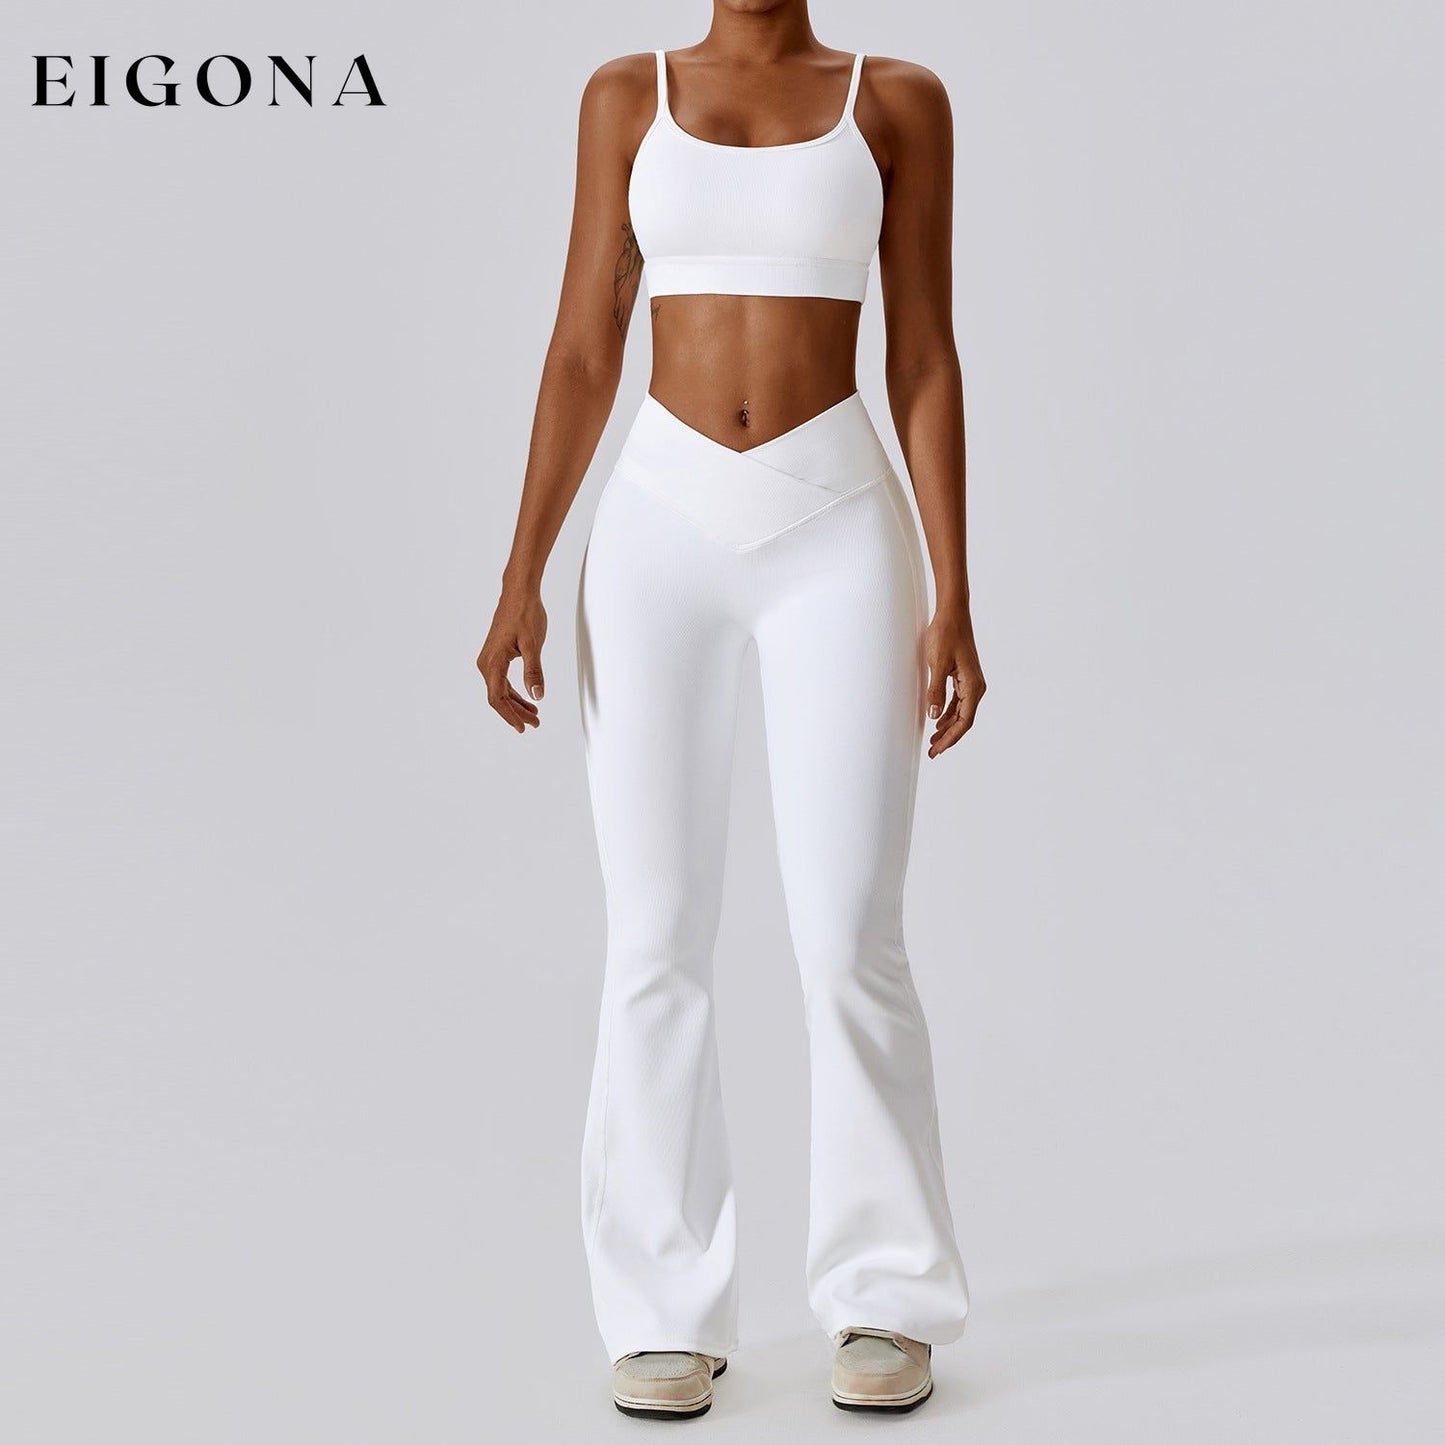 Thread Abdominal Shaping High Waist Beauty Back Yoga Suit Quick Drying Push up Hip Raise Skinny Workout Exercise Outfit -1 Bra Bell-Bottom Pants Swan White 2 piece activewear clothes set workout